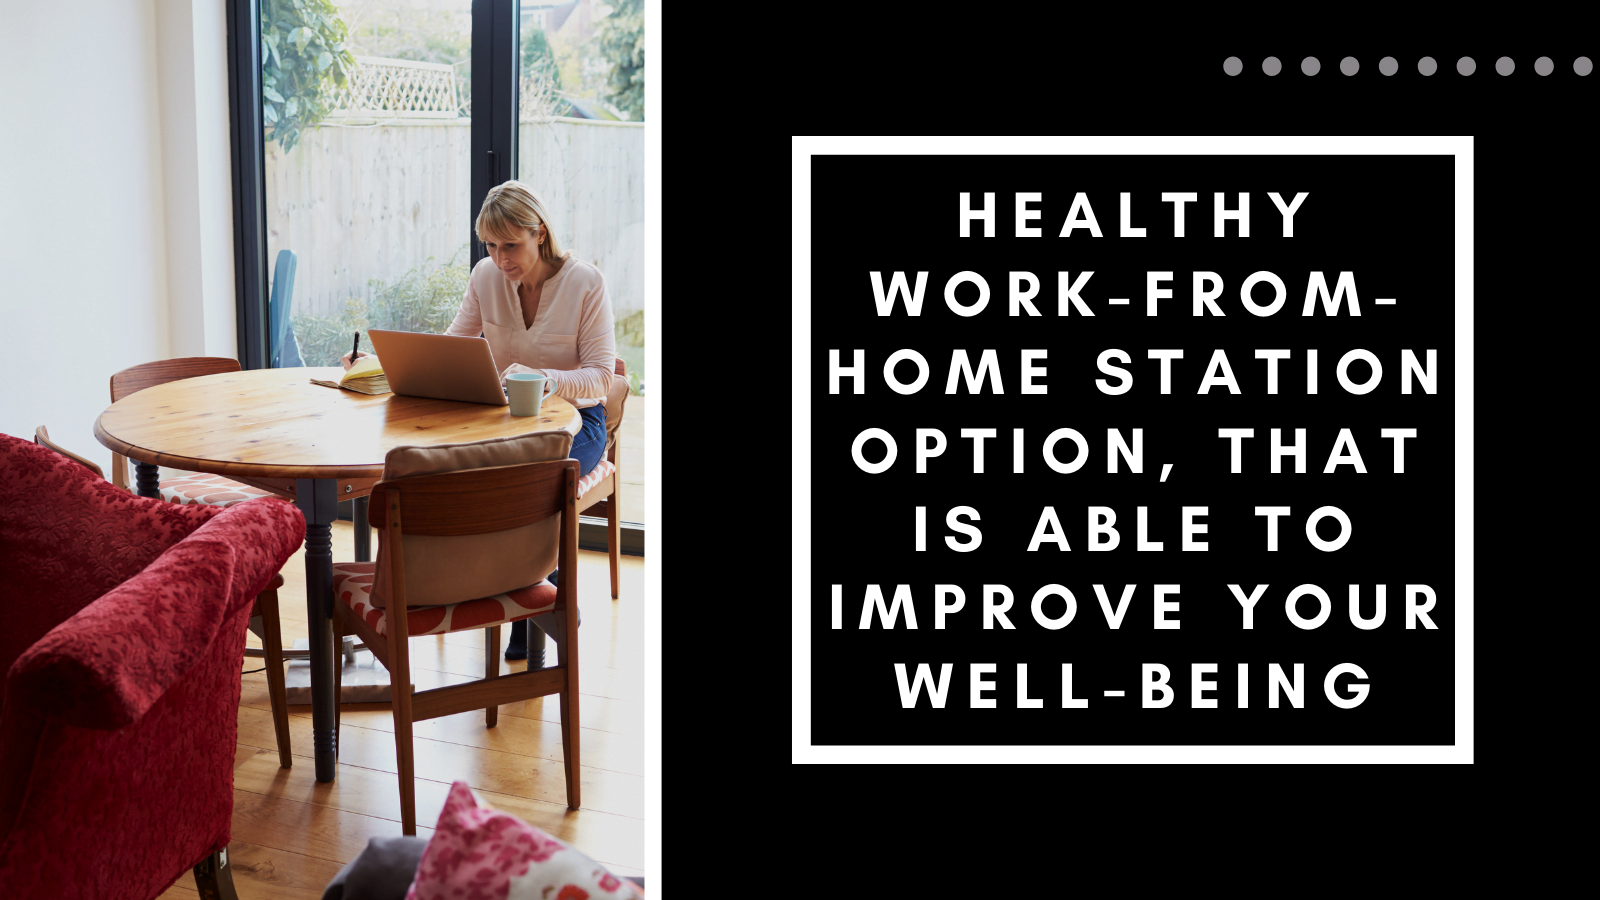 Healthy Work-From-Home Station Option, that is Able to Improve Your Well-Being